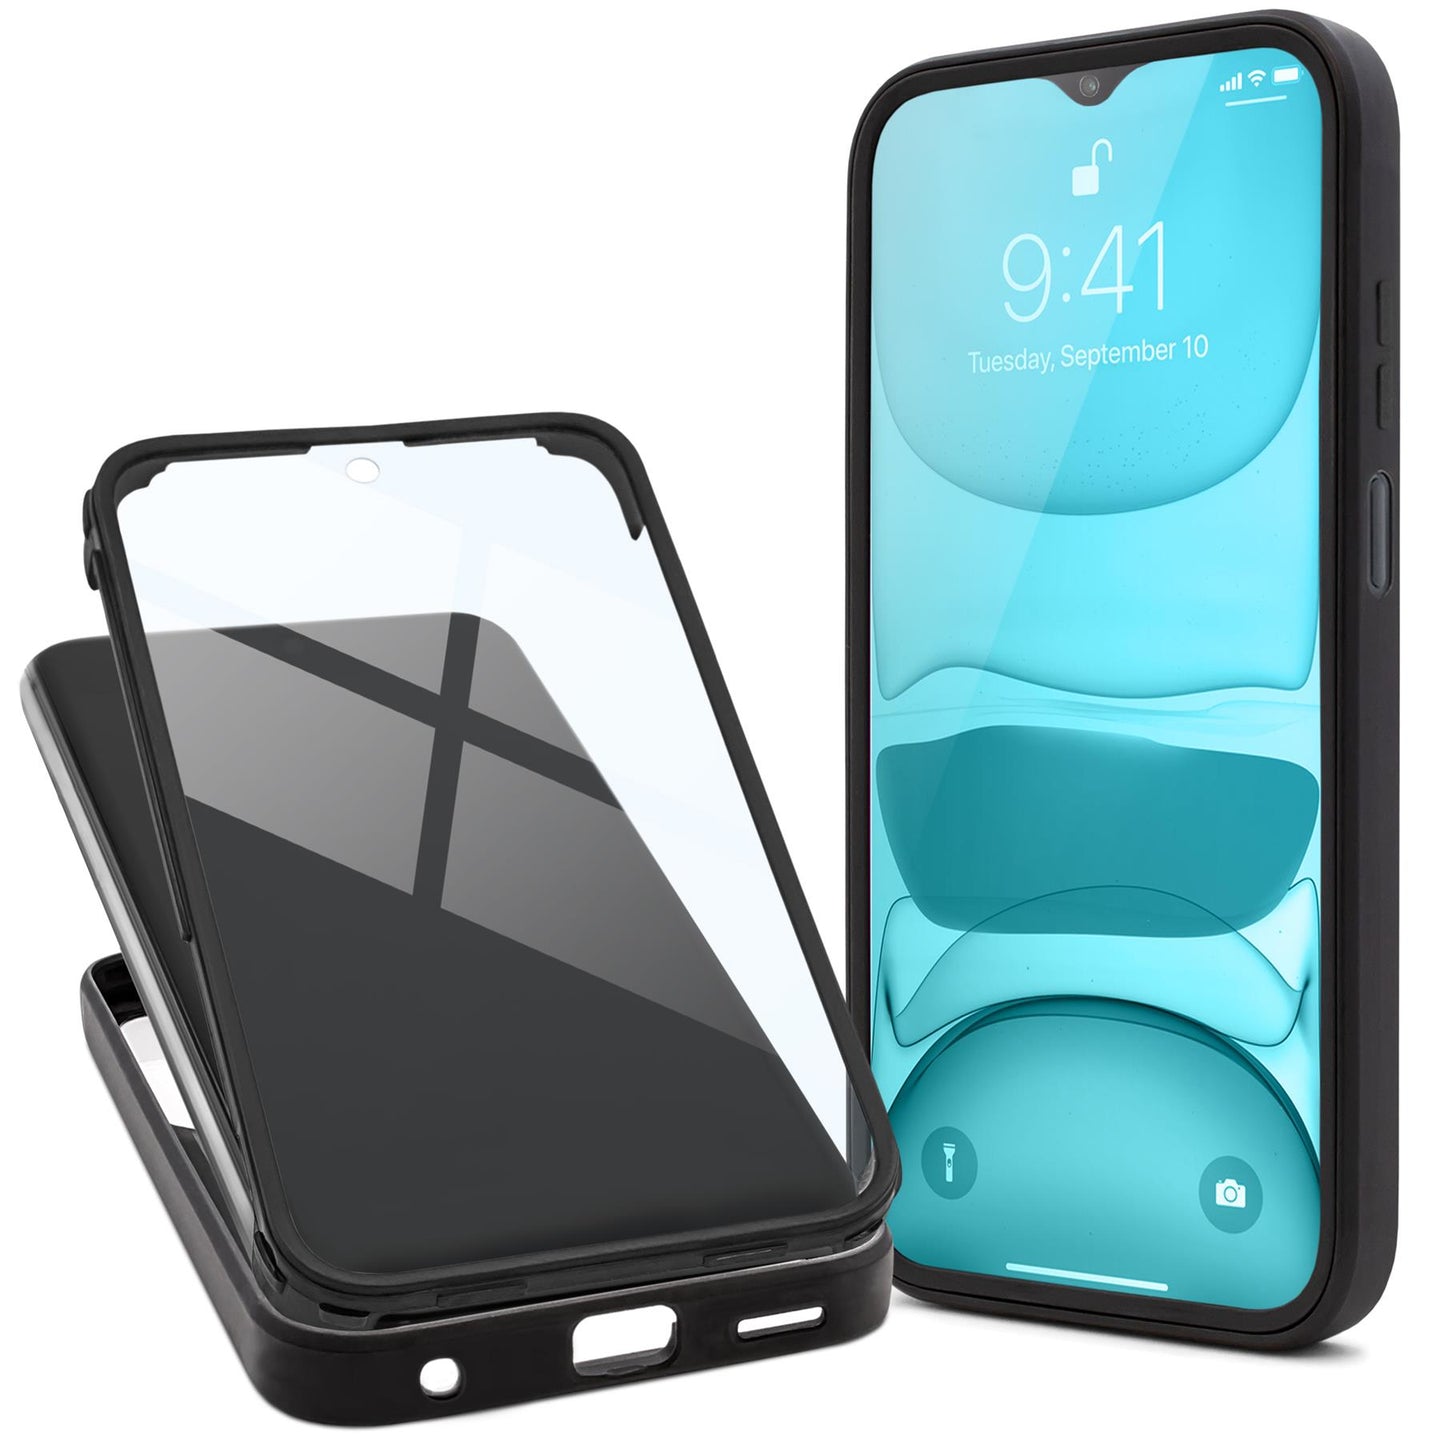 Moozy 360 Case for Samsung A13 - Black Rim Transparent Case, Full Body Double-sided Protection, Cover with Built-in Screen Protector